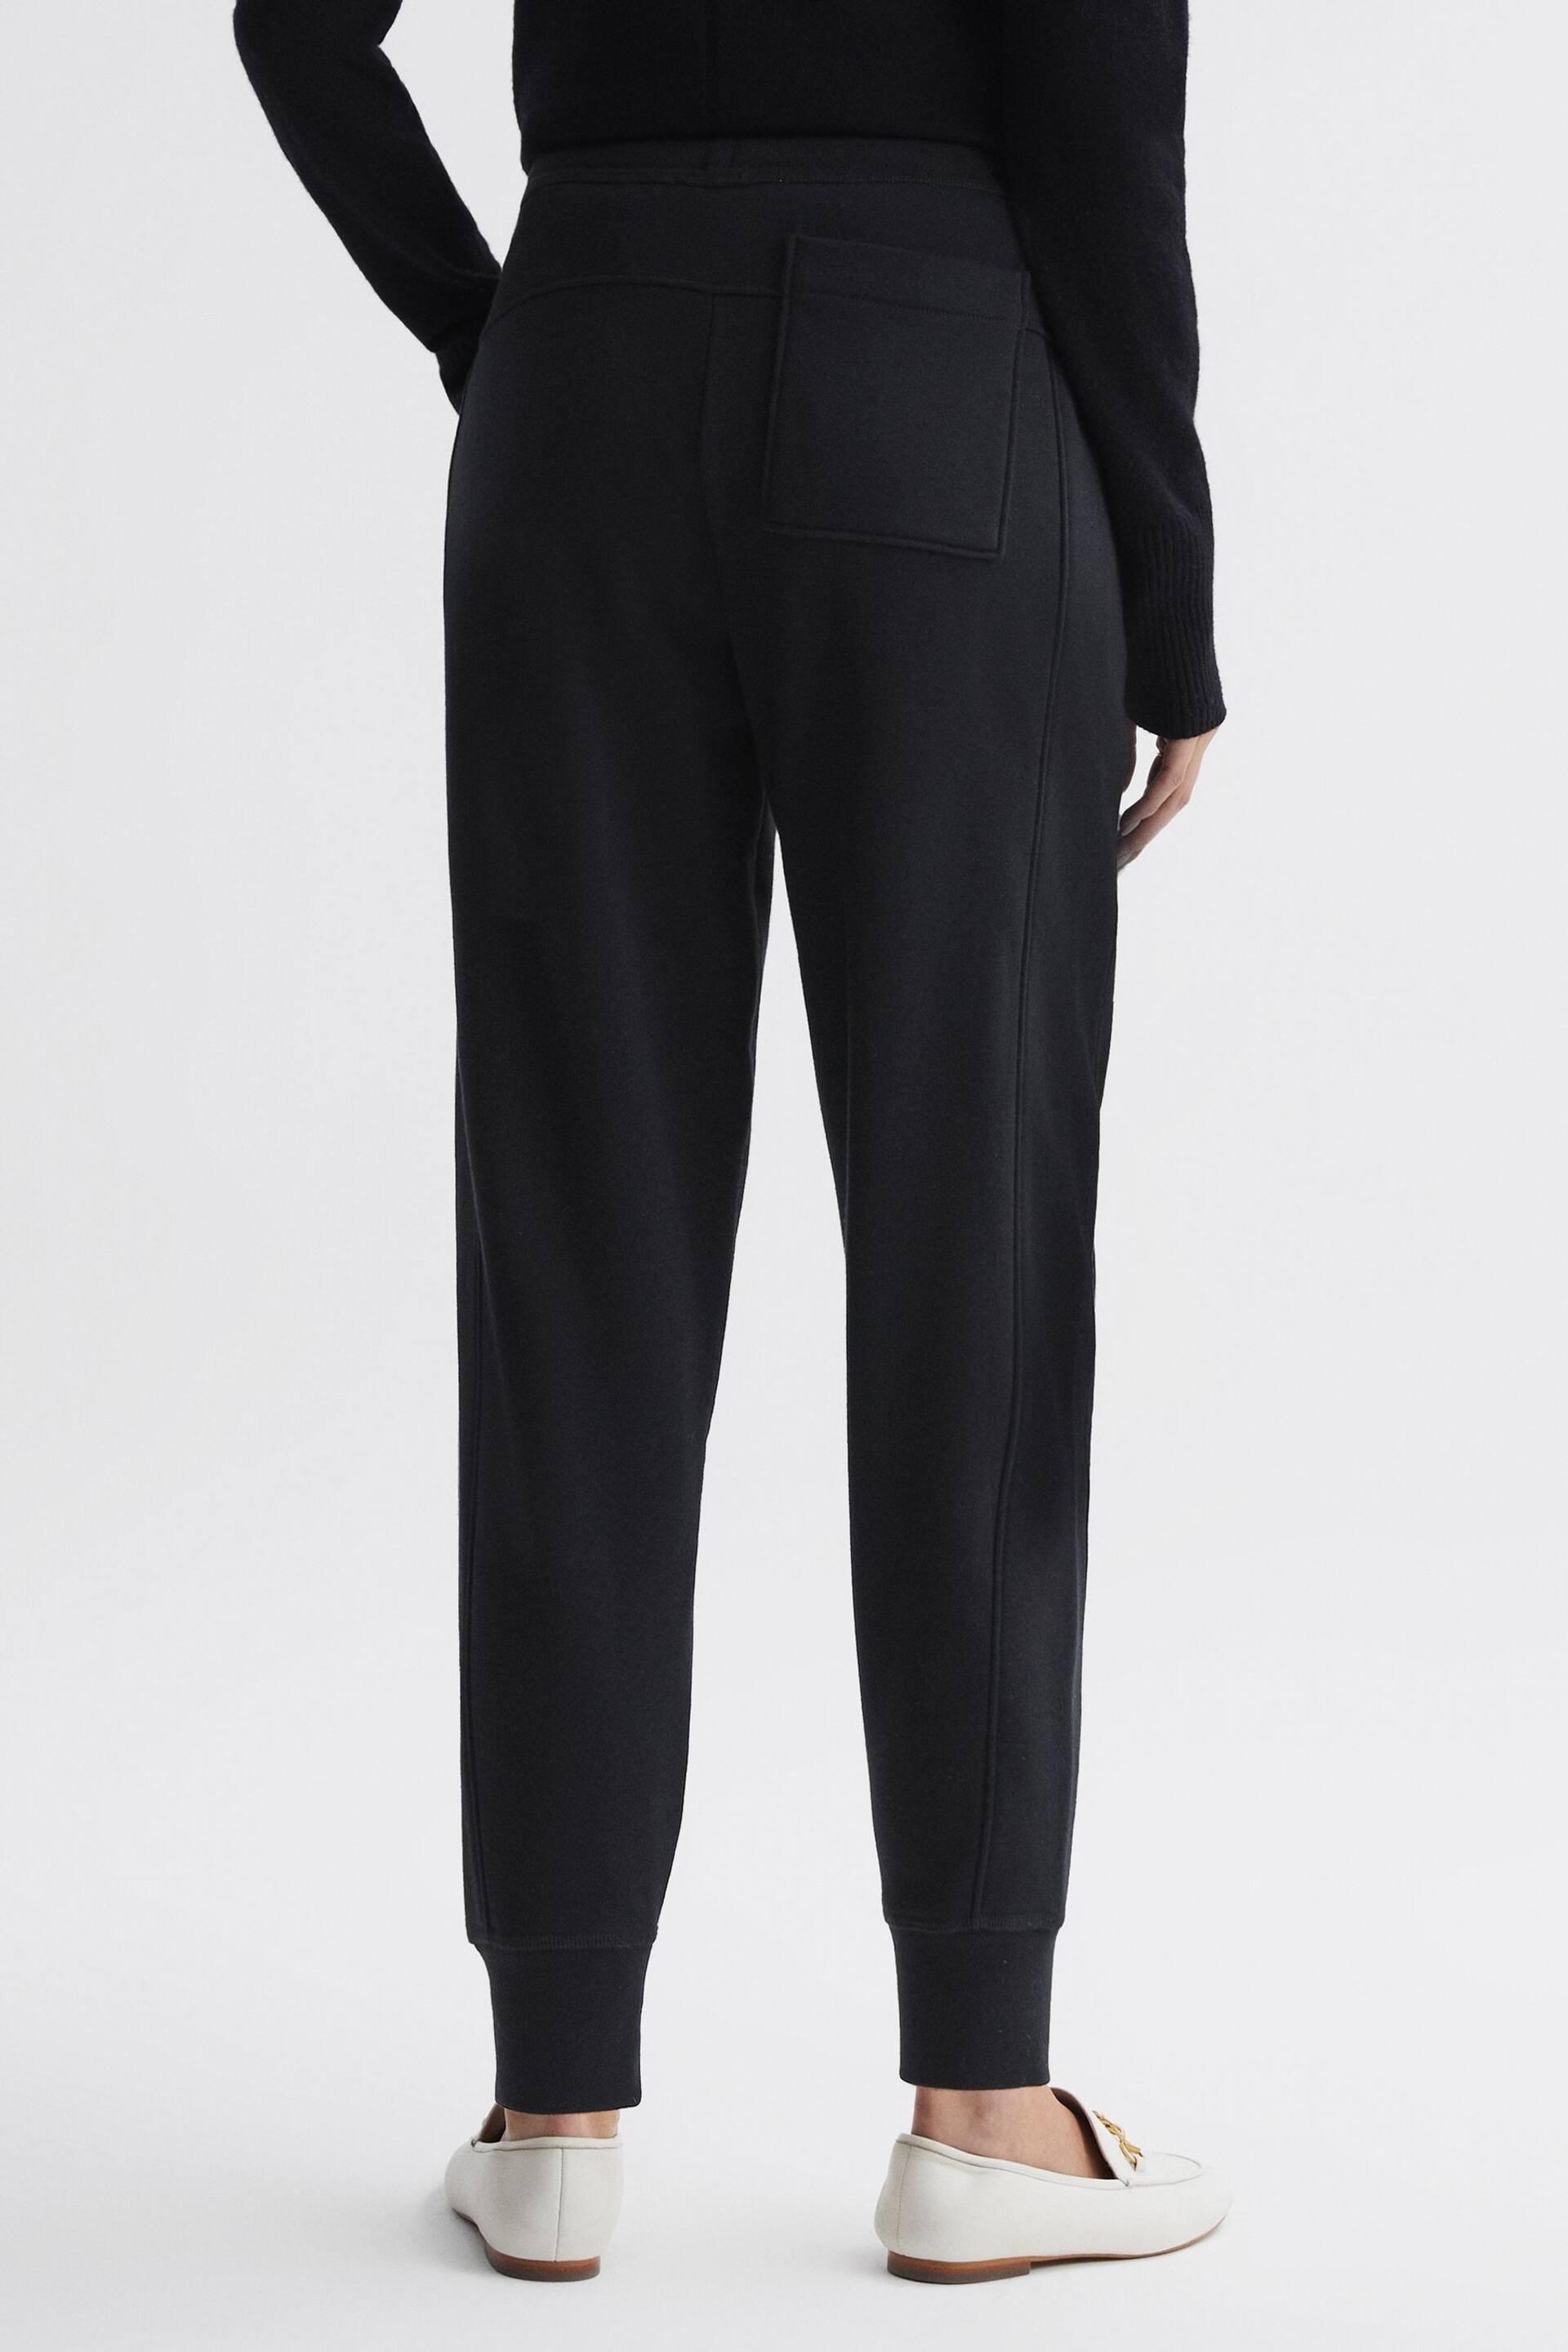 Reiss Black Bronte Cotton Drawstring Cuffed Joggers - Image 4 of 4